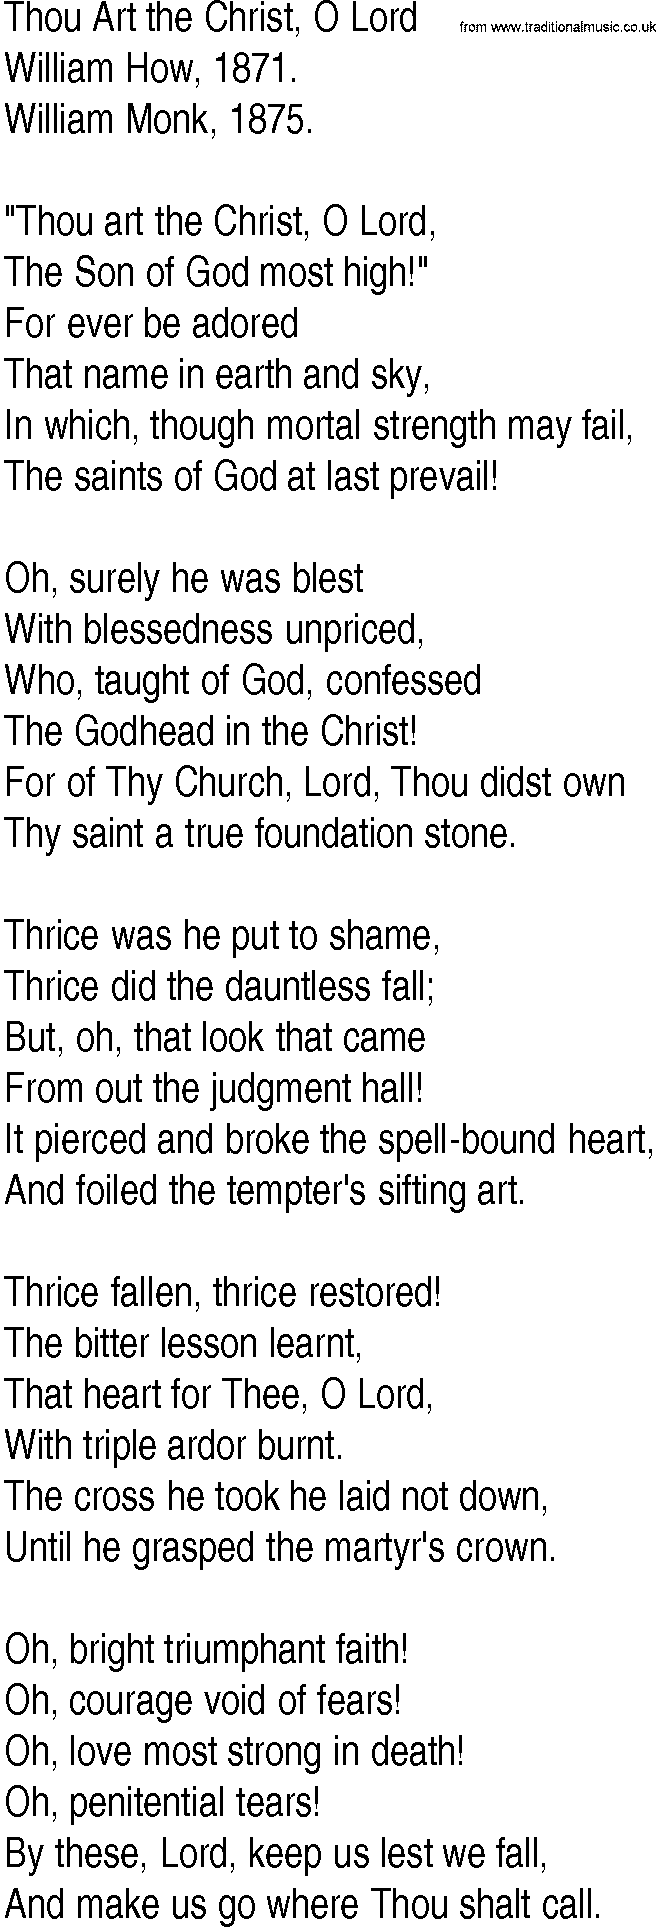 Hymn and Gospel Song: Thou Art the Christ, O Lord by William How lyrics